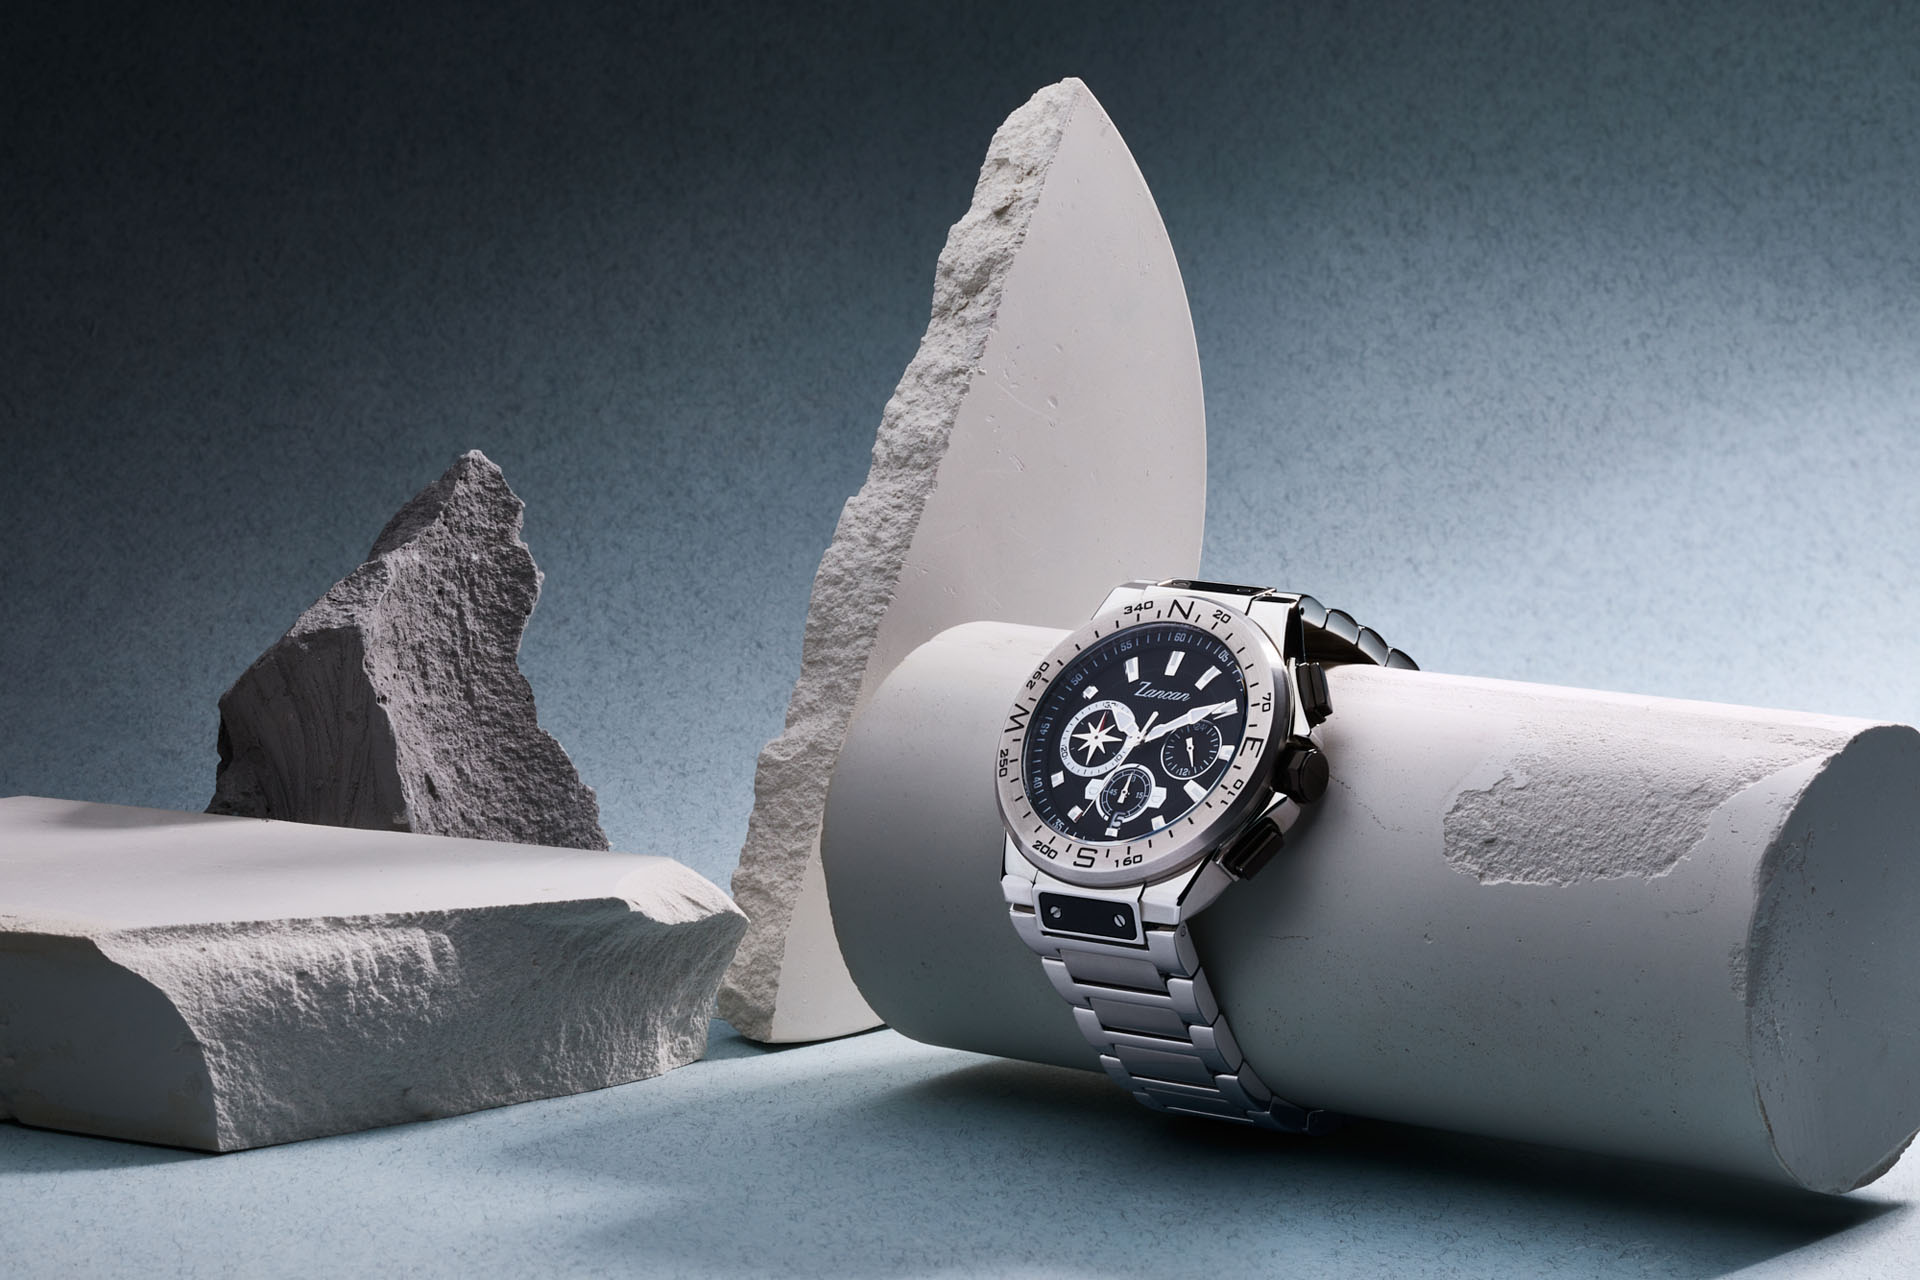 Zancan Gioielli still life campaign photographed by David Hatters